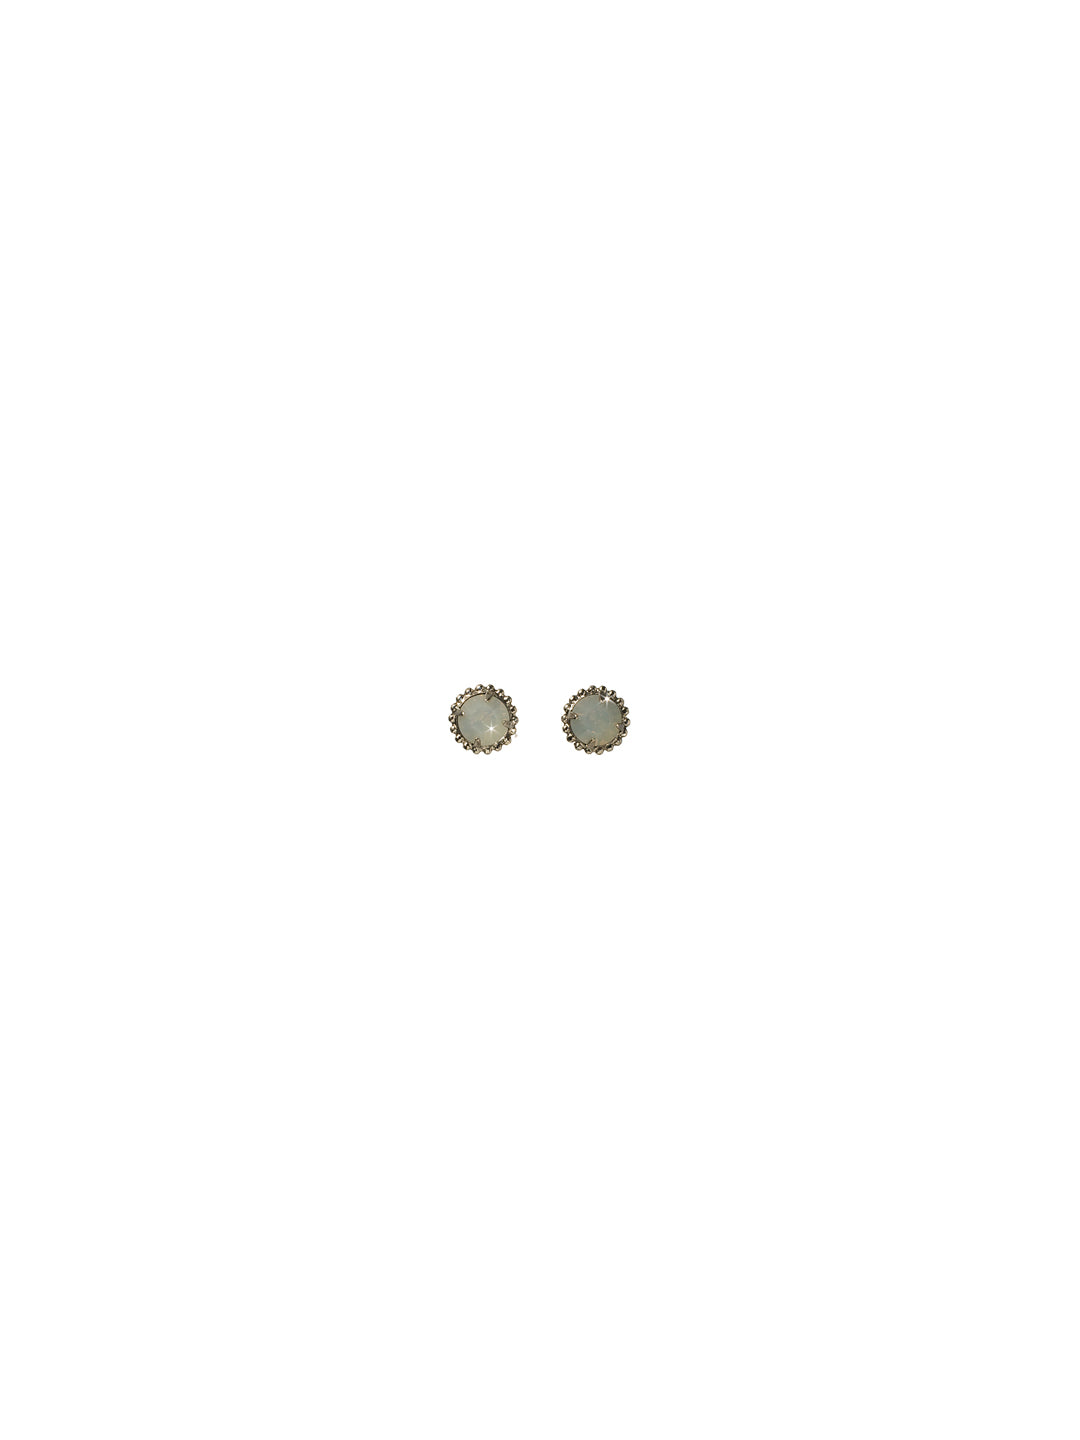 Simplicity Stud Earrings - EBY38ASAES